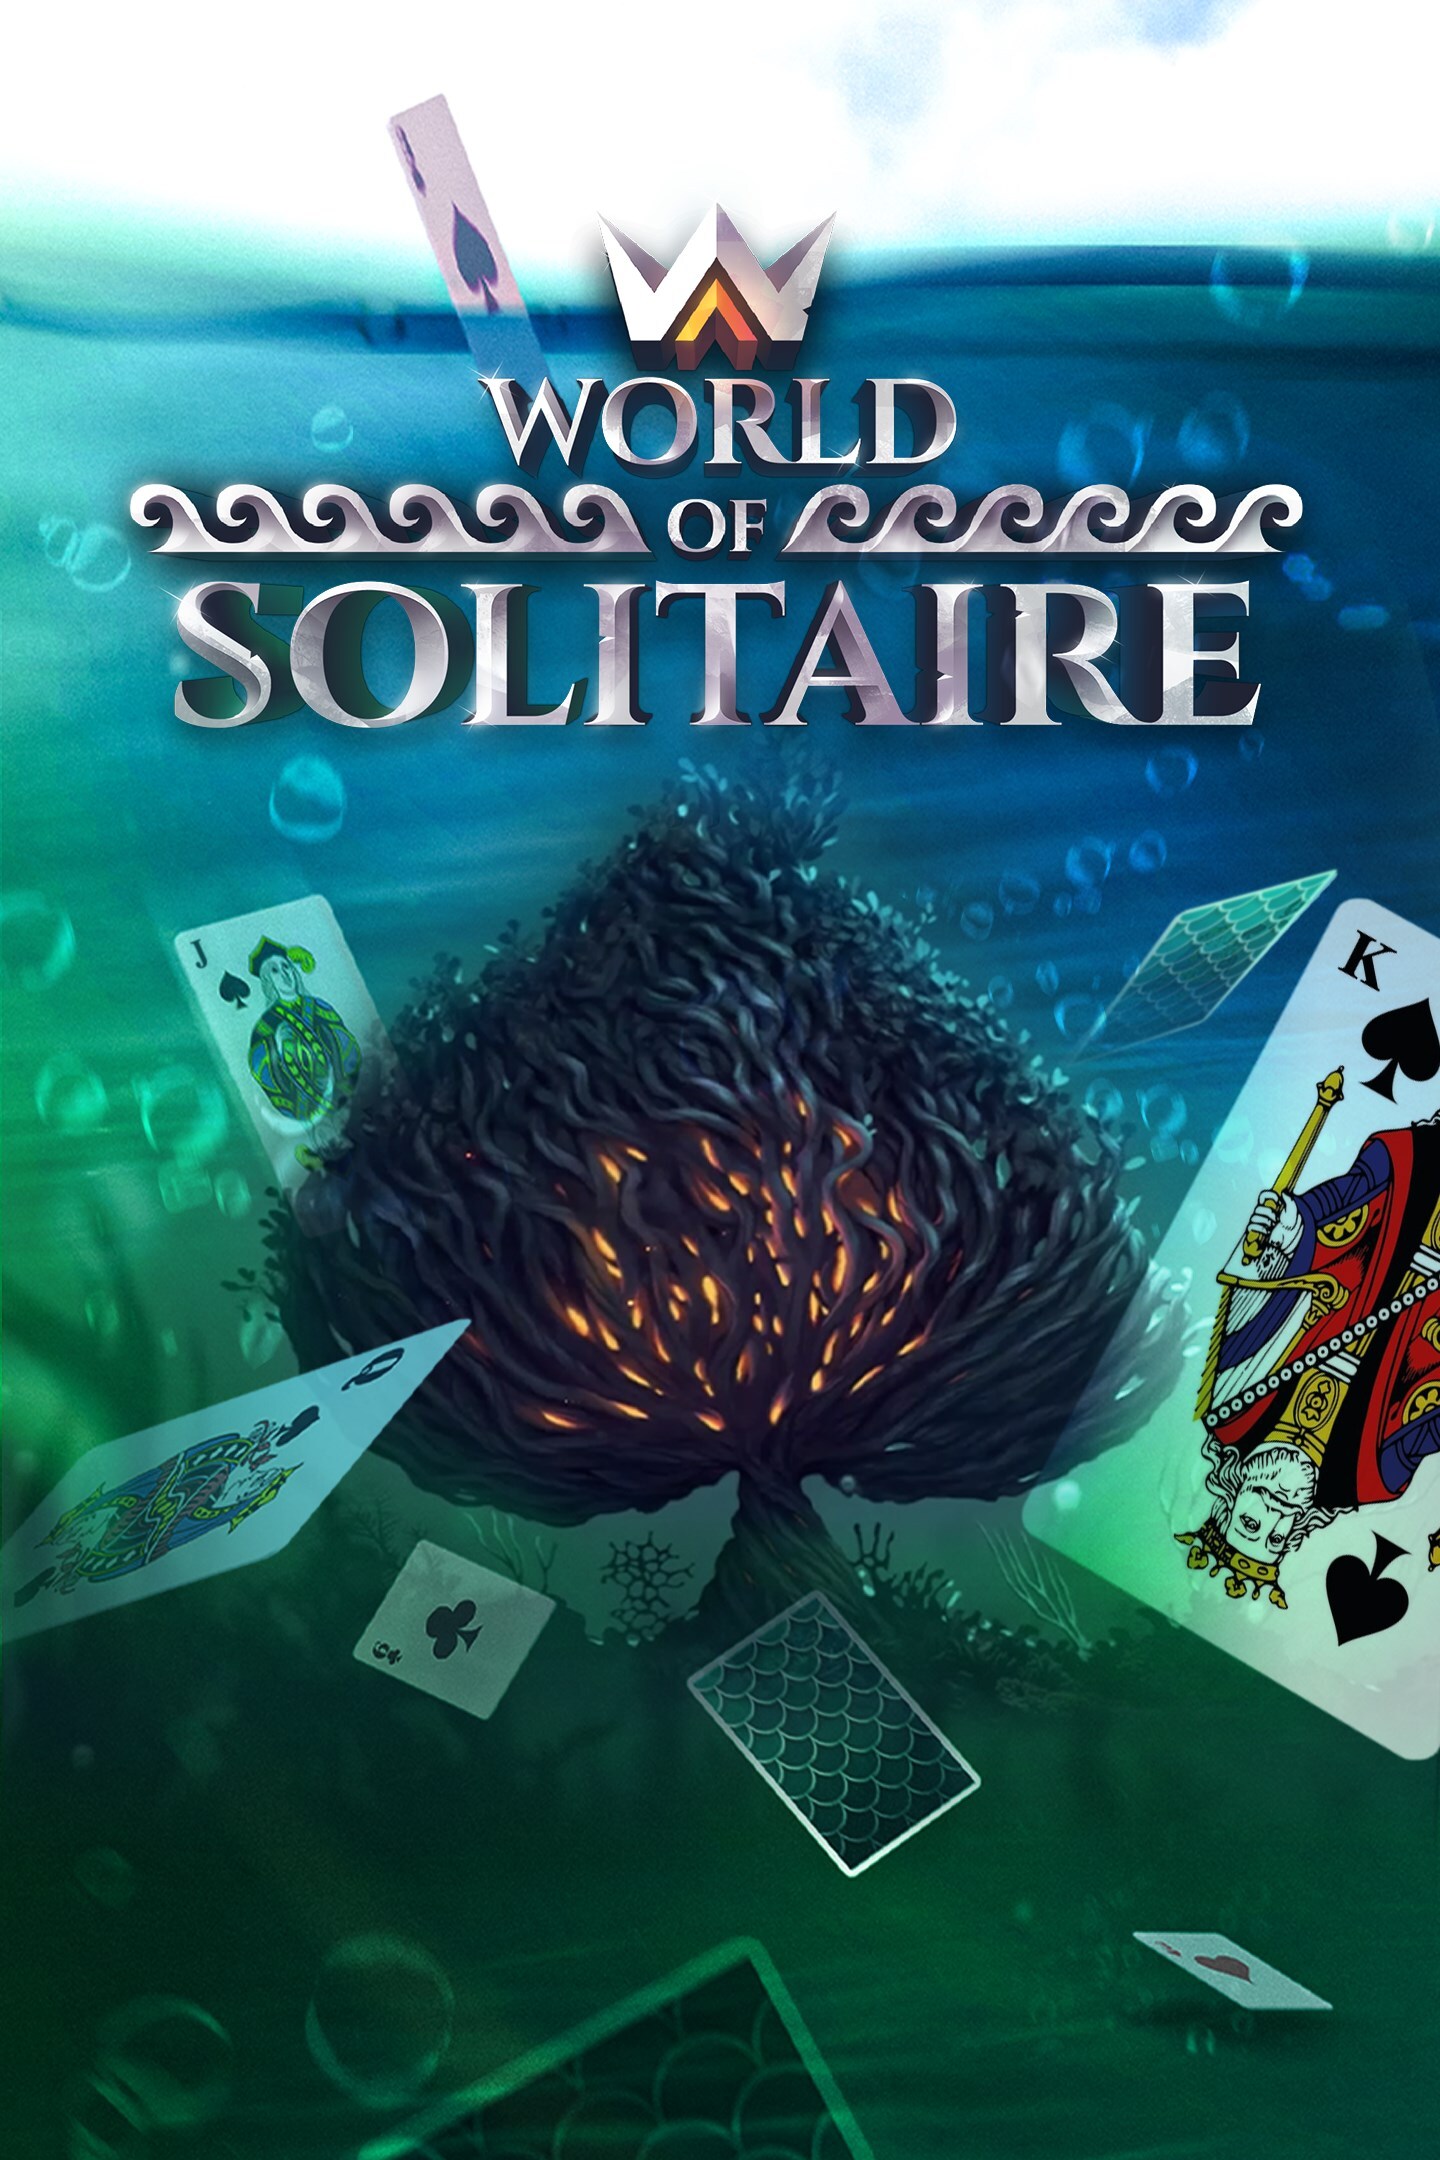 Online Games at Solitaire.org: A Review - Welcome to Erin's World